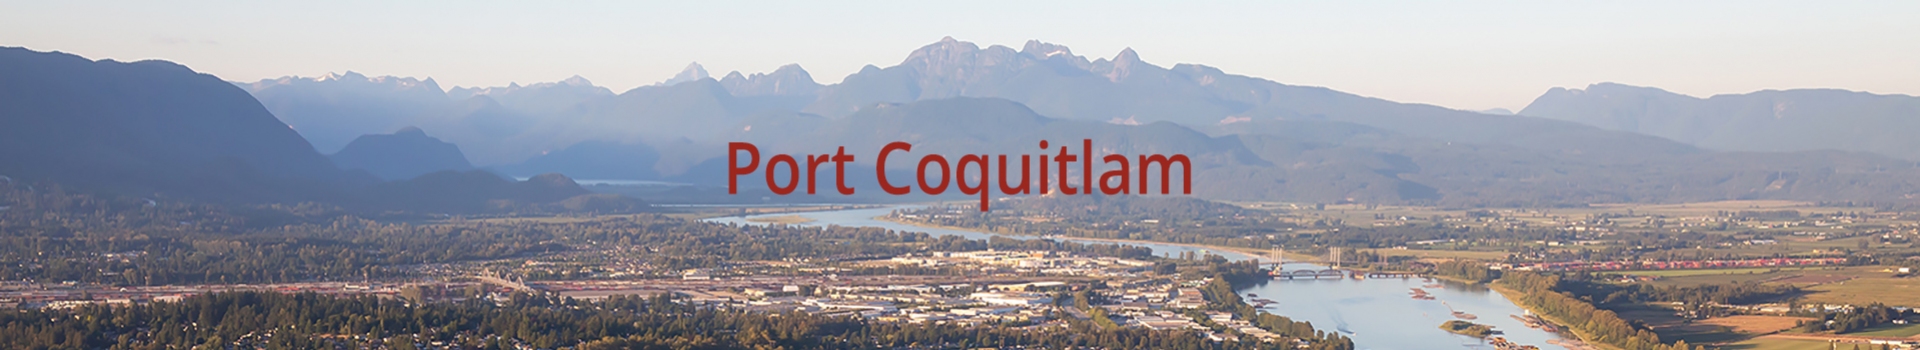 notary-public-services-port-coquitlam